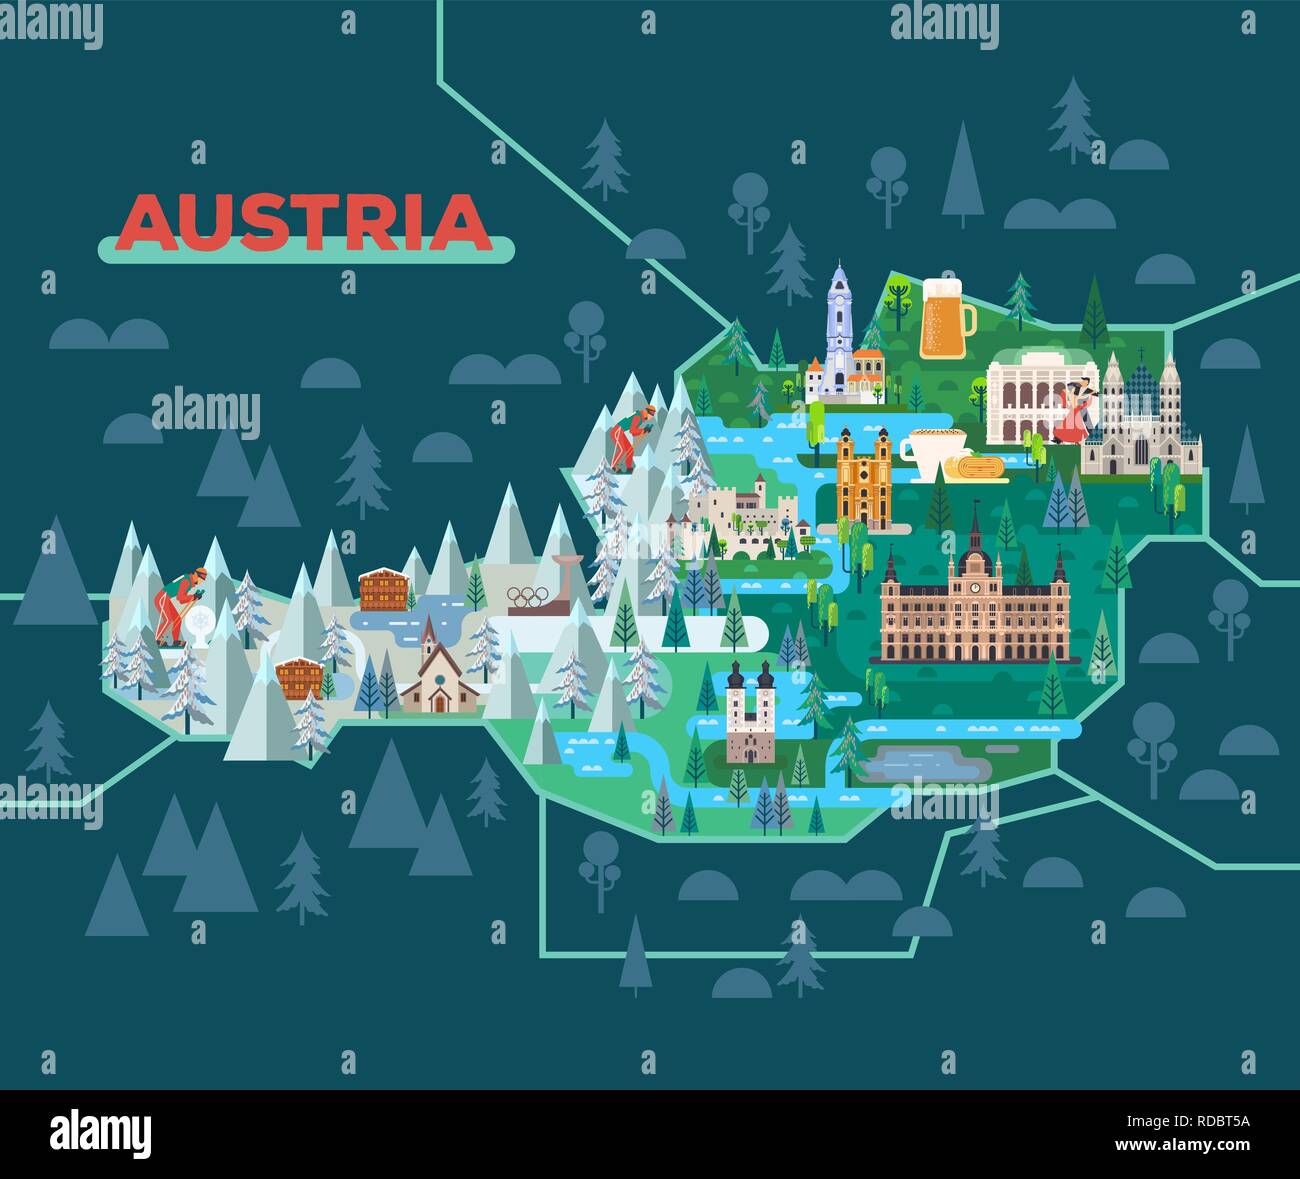 Travel map with landmarks of Austria. Stock Vector